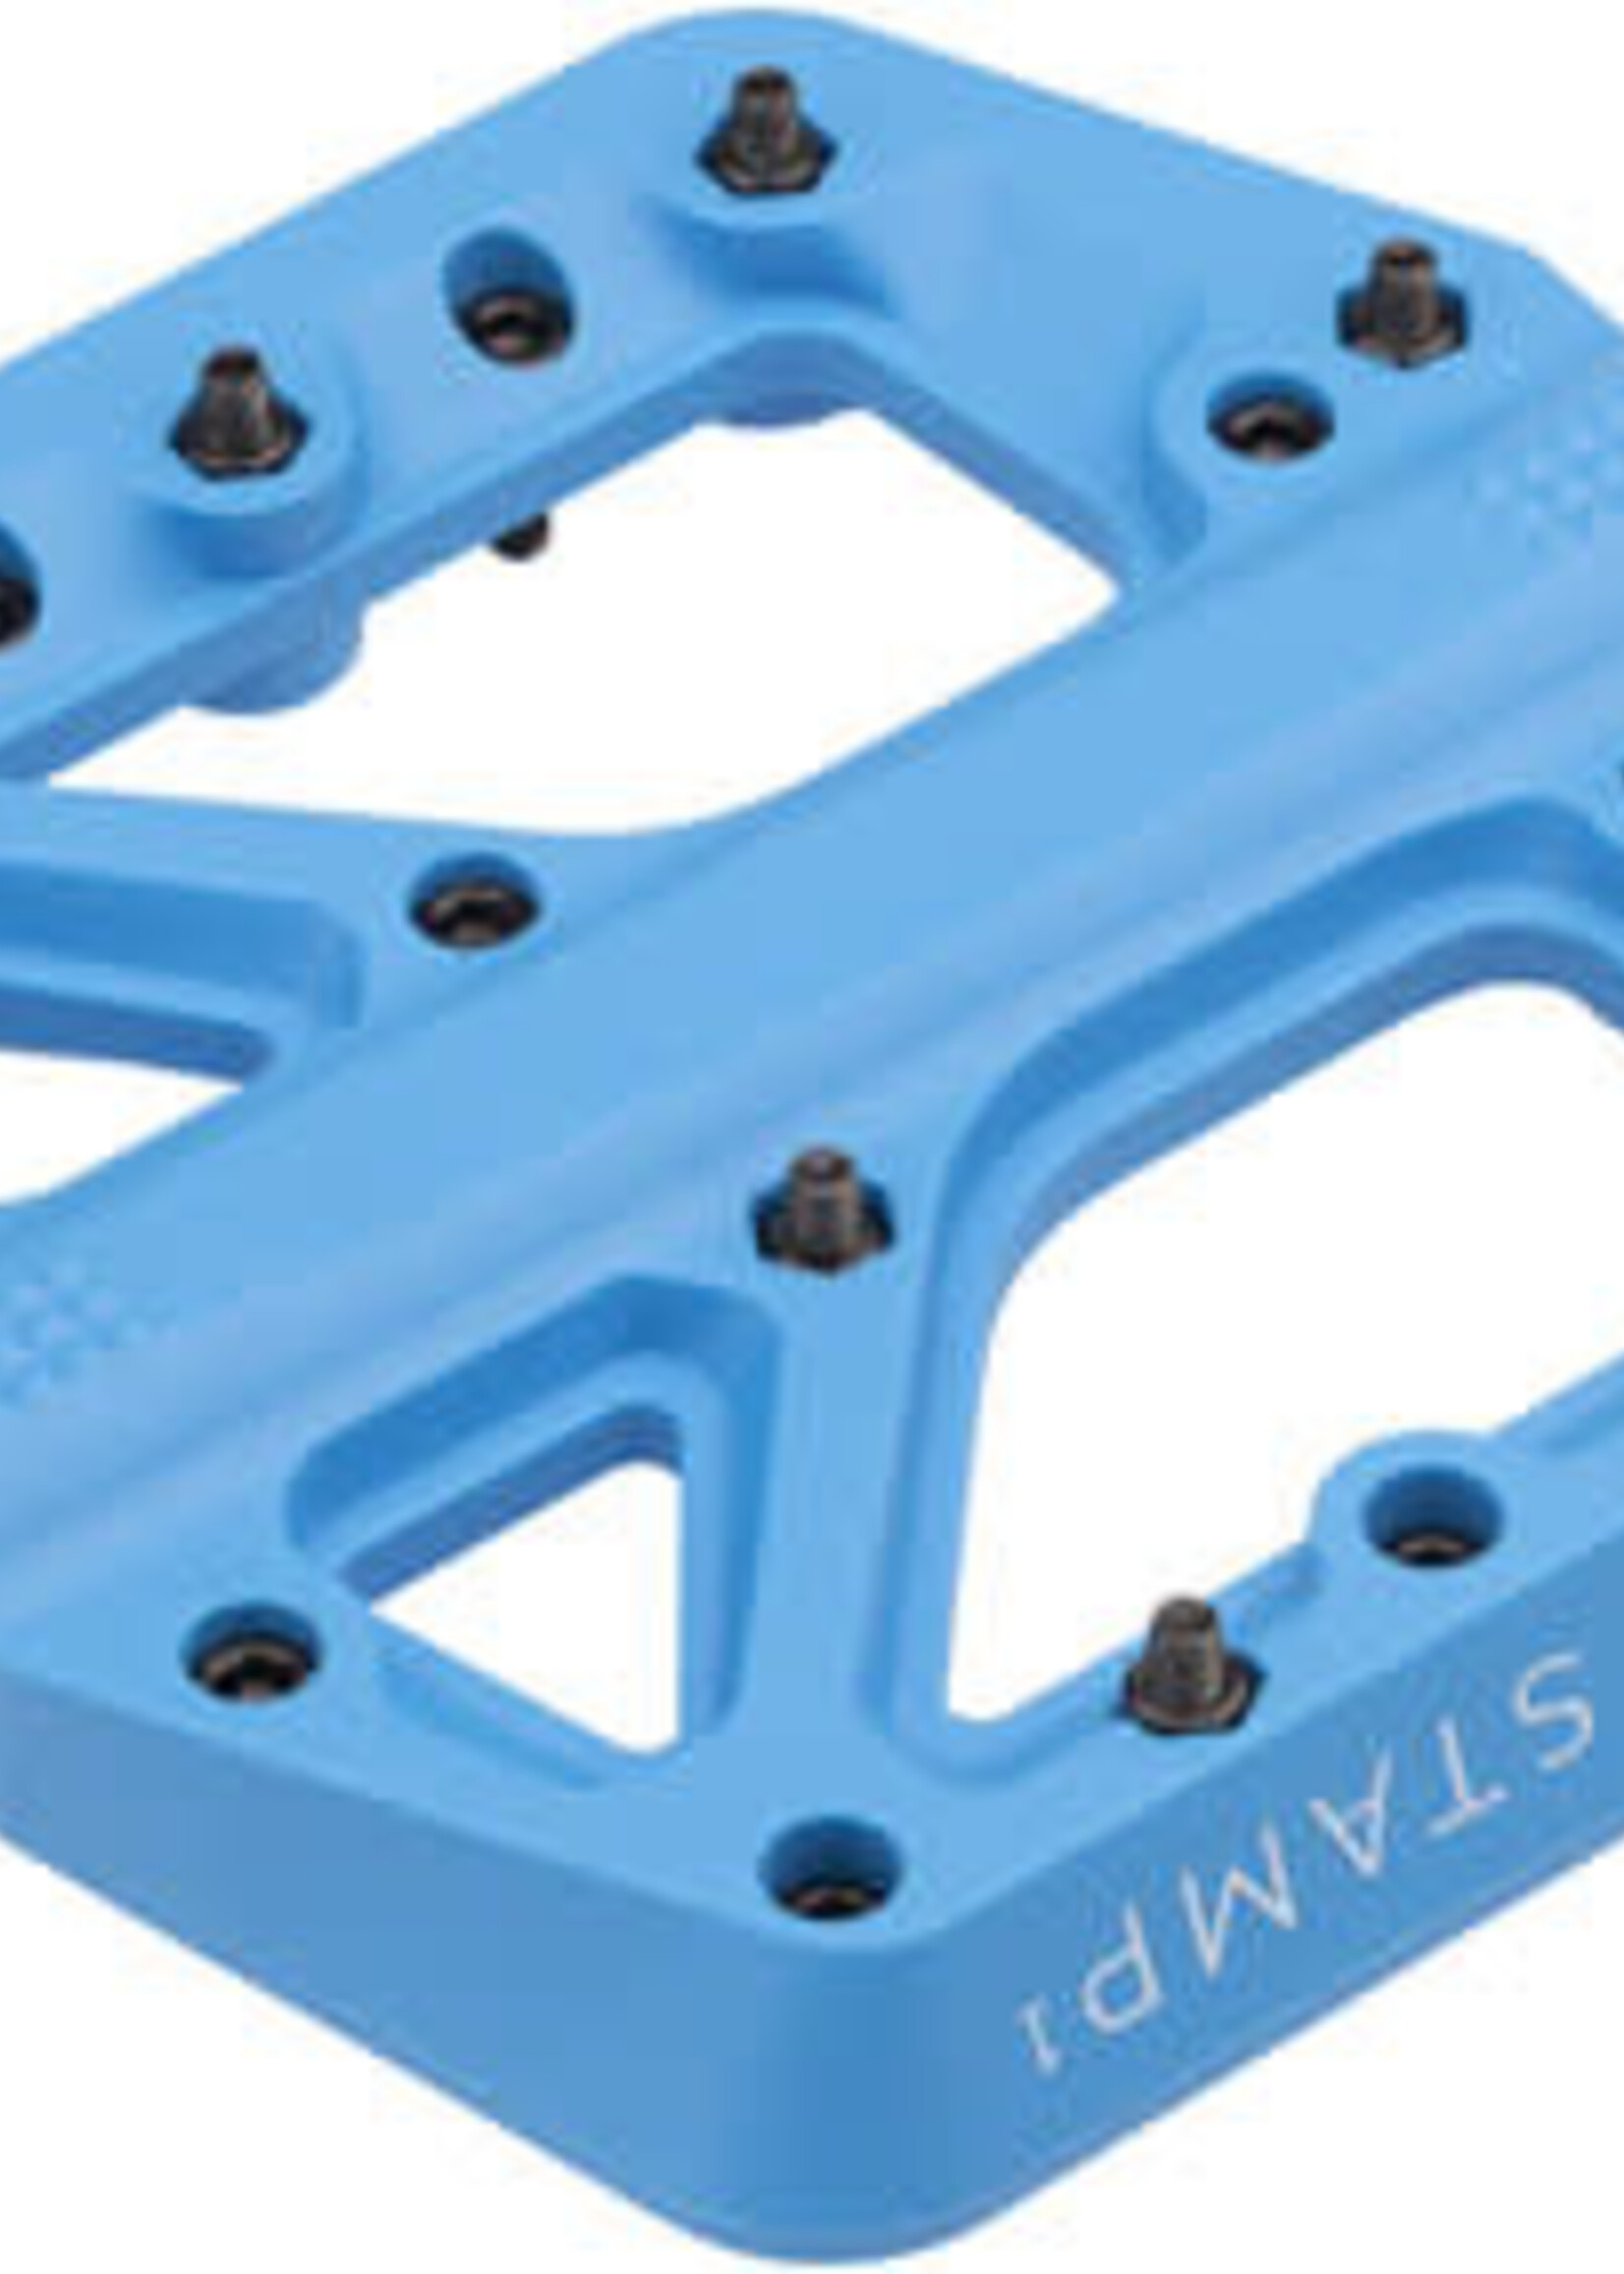 Crank Brothers Crank Brothers Stamp 1 Pedals - Platform Composite 9/16 Blue Small